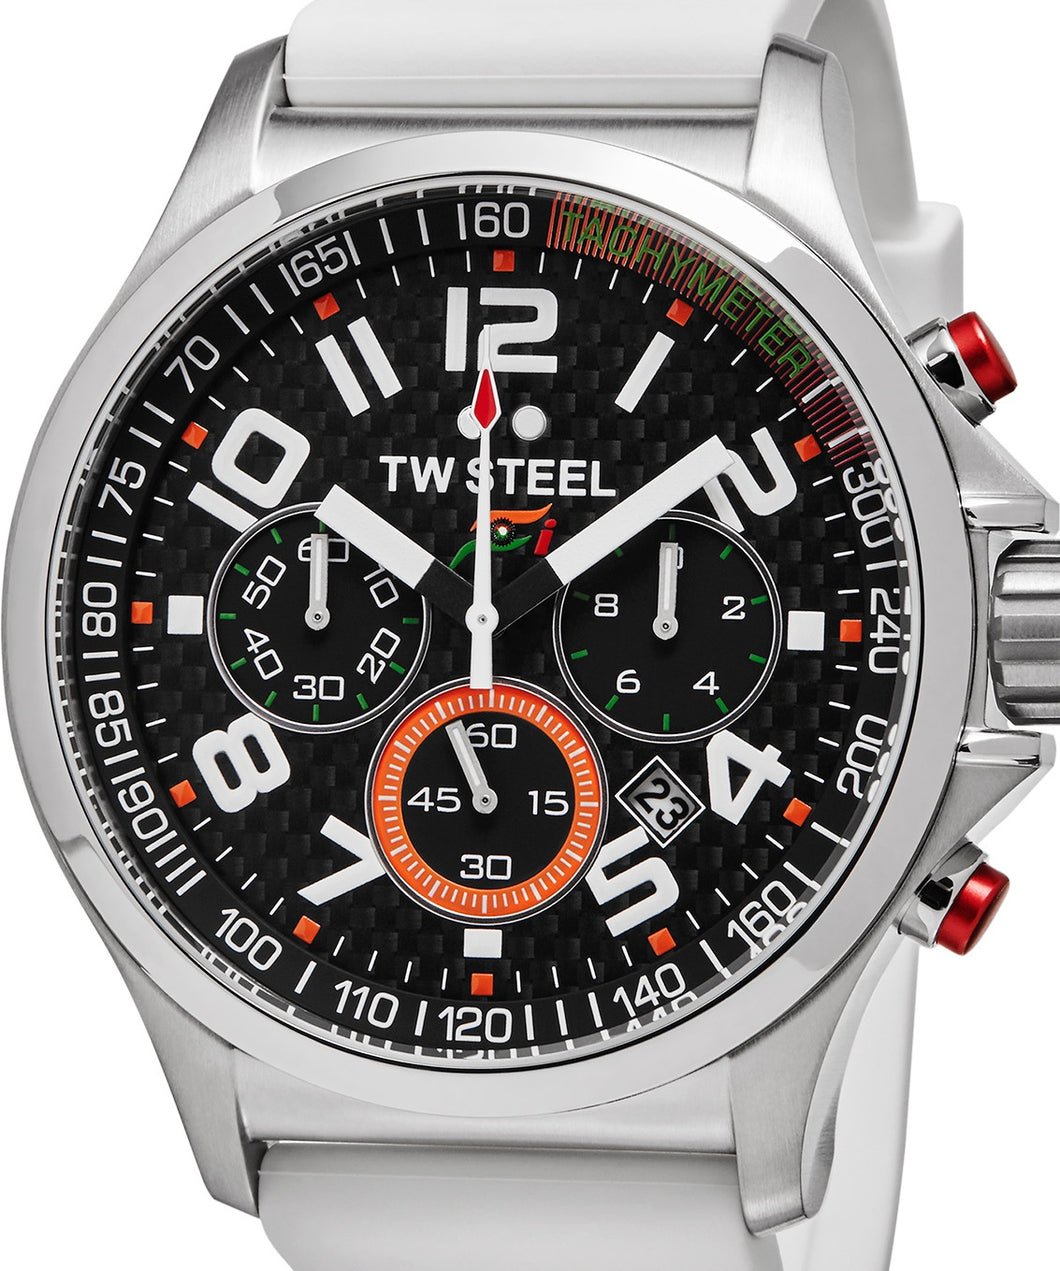 Authentic TW STEEL Sahara Force Pilot Edition Chronograph Oversized Mens Watch